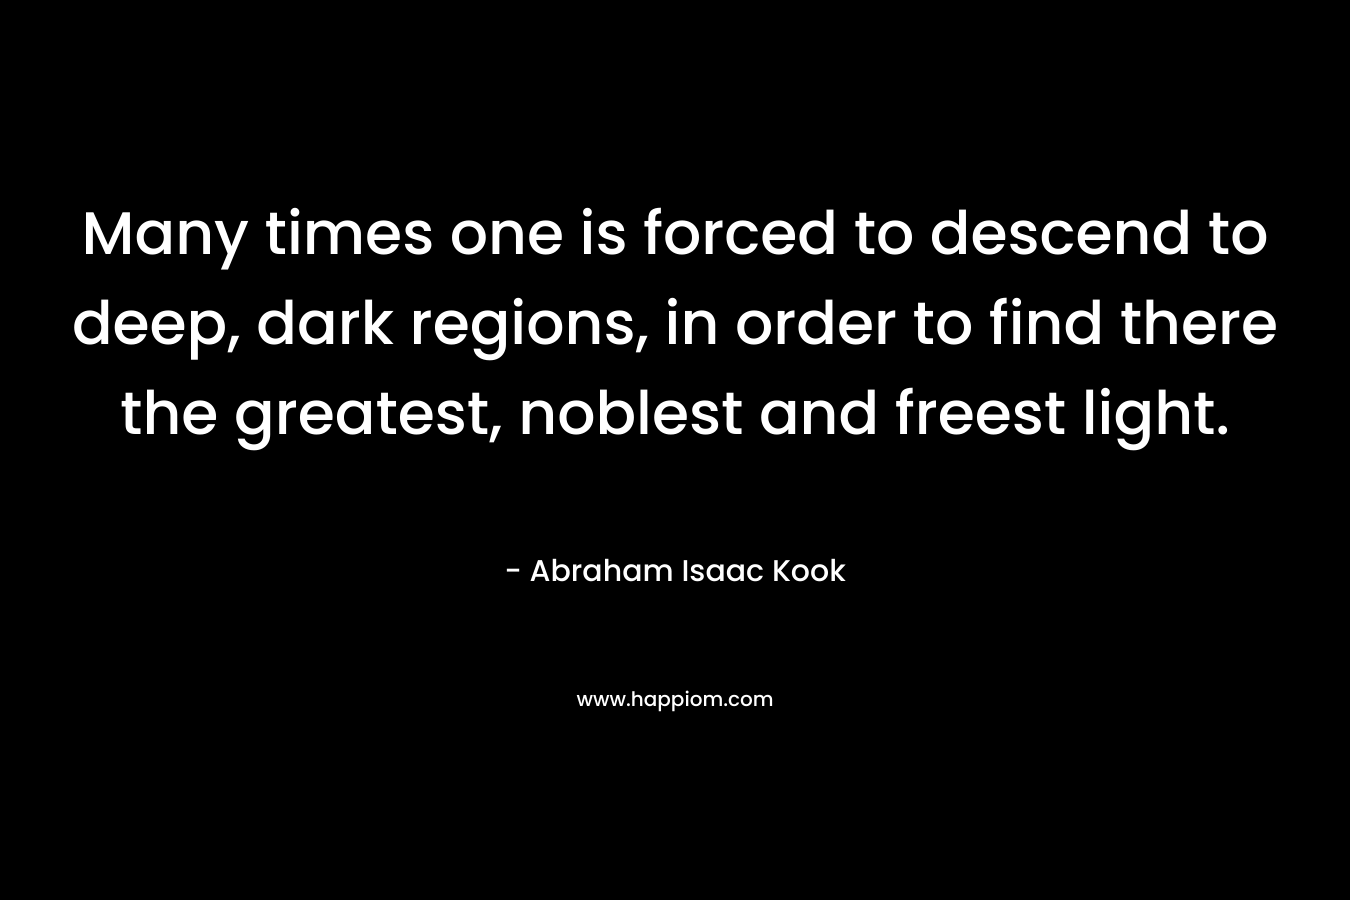 Many times one is forced to descend to deep, dark regions, in order to find there the greatest, noblest and freest light. – Abraham Isaac Kook